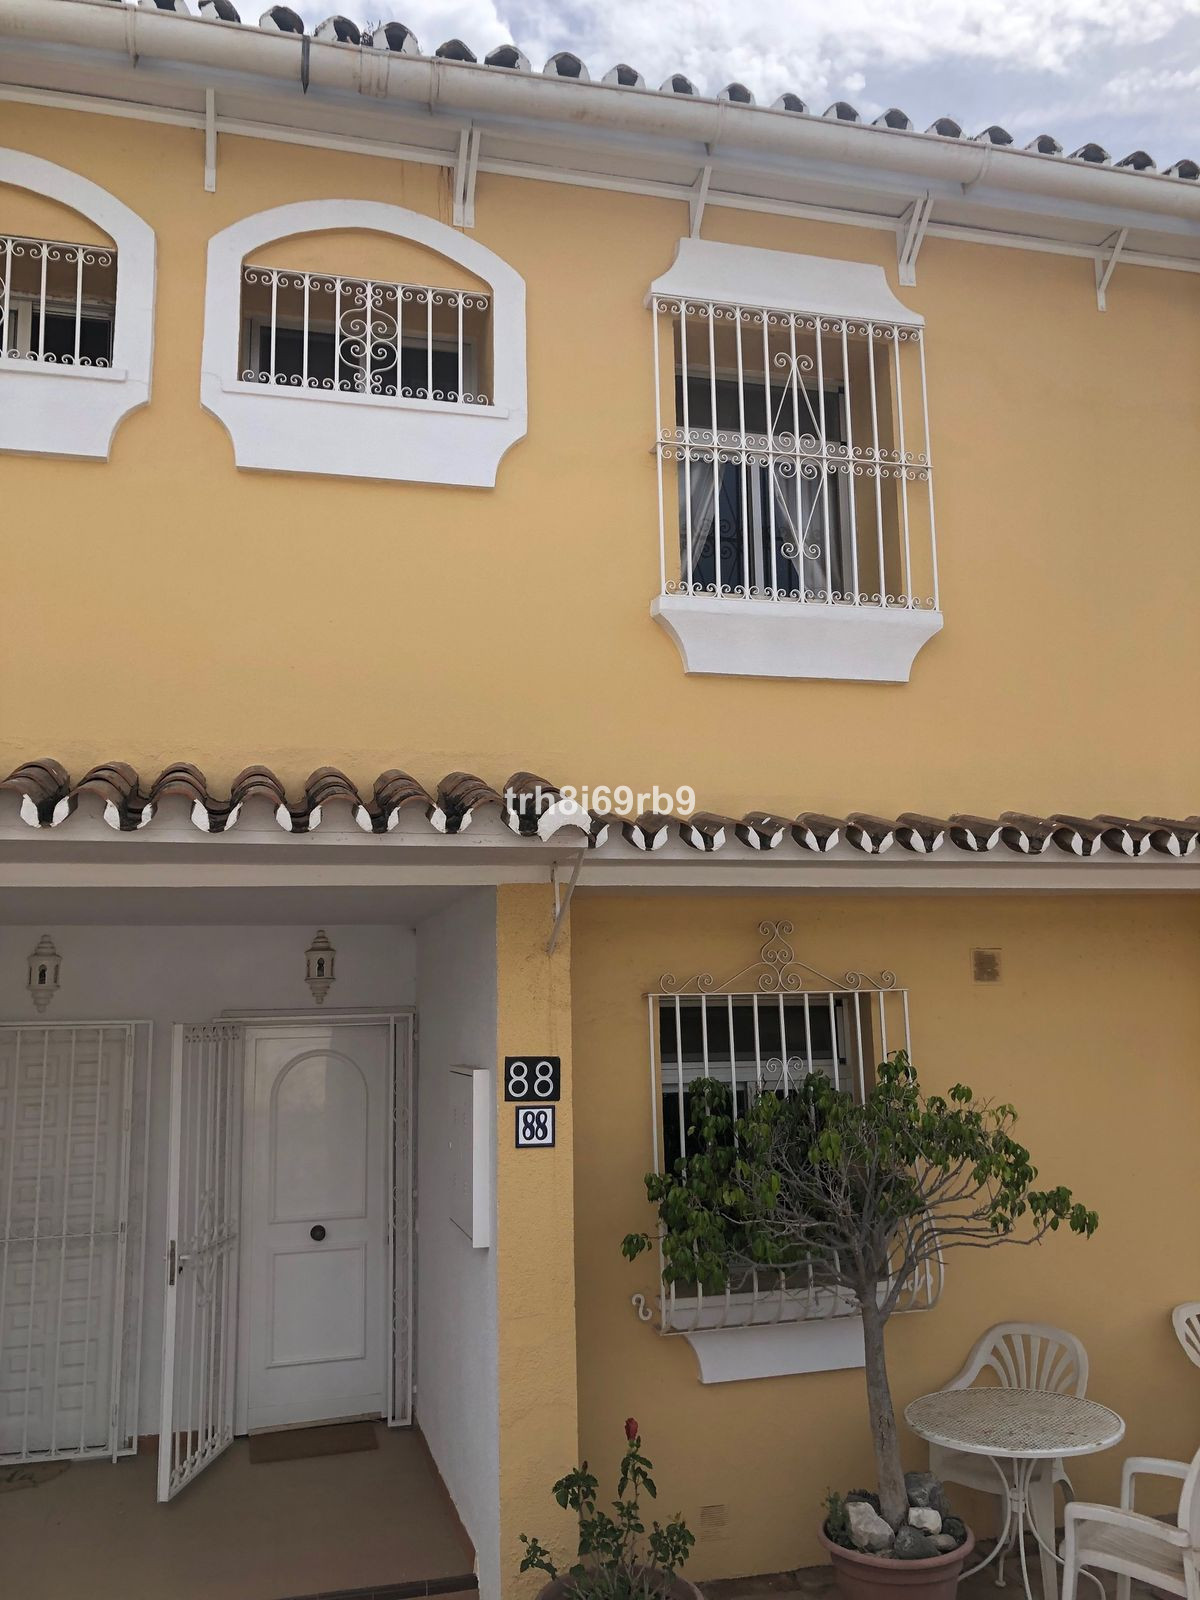 						Townhouse  Terraced
													for sale 
																			 in Atalaya
					